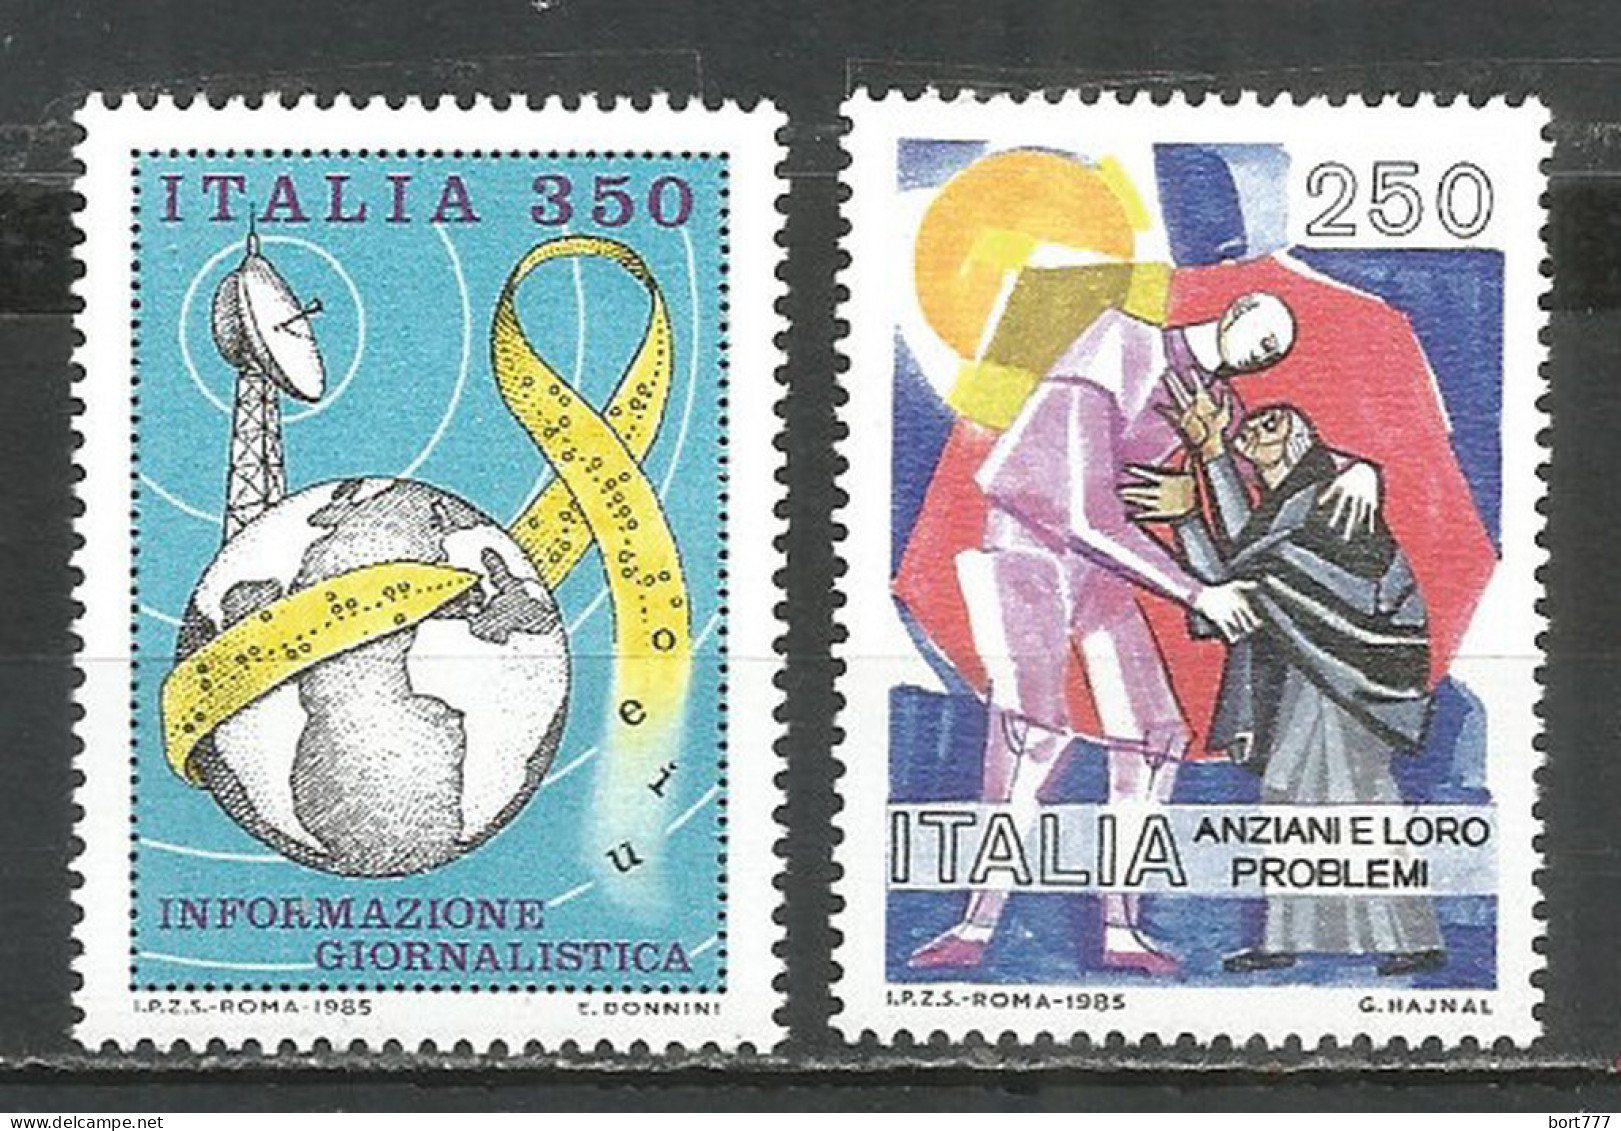 Italy 1985 Mint MNH(**) Stamps  Michel # 1905,1906 - 1981-90: Mint/hinged